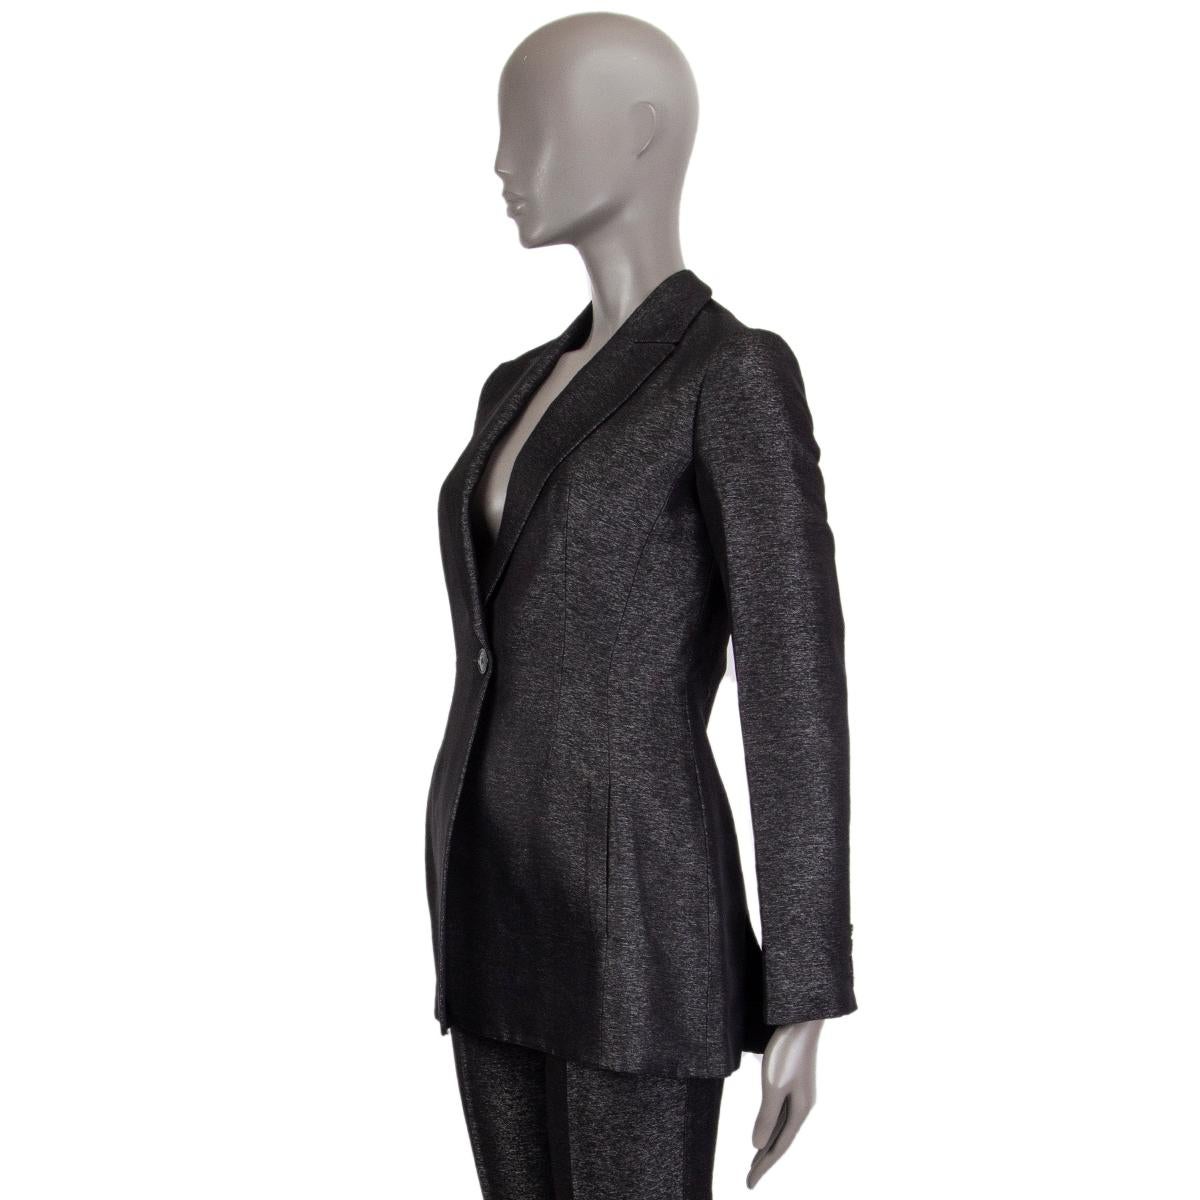 Christian Dior fitted blazer in metallic black and grey viscose (84%) and silk (16%). Closes with one button at front and is lined in black silk (100%). Two slits on the back. Has been worn once and is in virtually new condition. Comes with matching